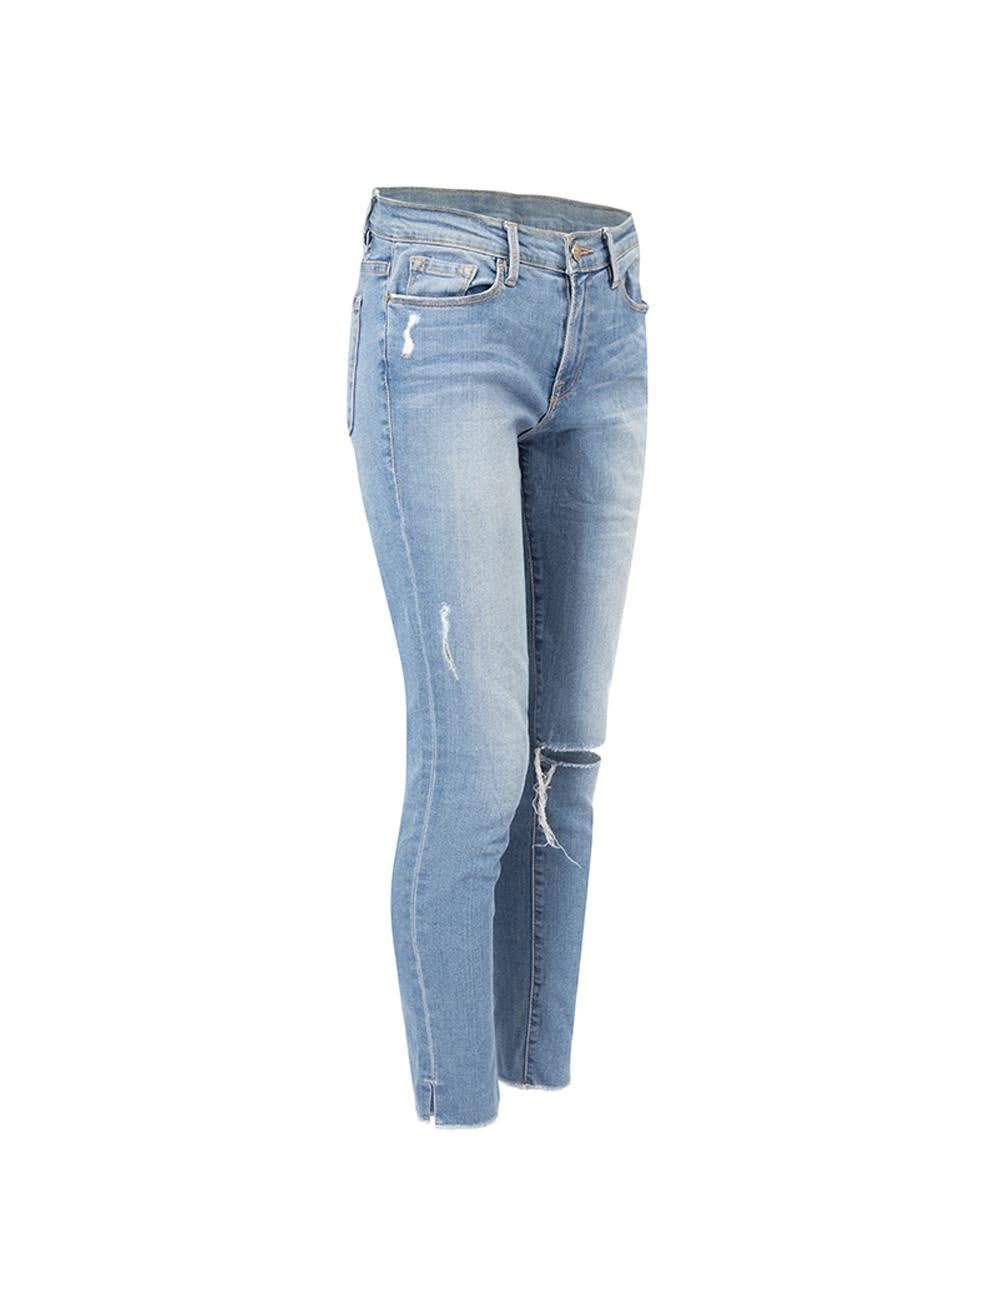 CONDITION is Very good. Minimal wear to jeans is evident. Minimal wear to the waistband and overall denim material which is soft from use on this used Frame designer resale item. Details Blue Denim Skinny jeans Cropped length Mid rise Ripped detail